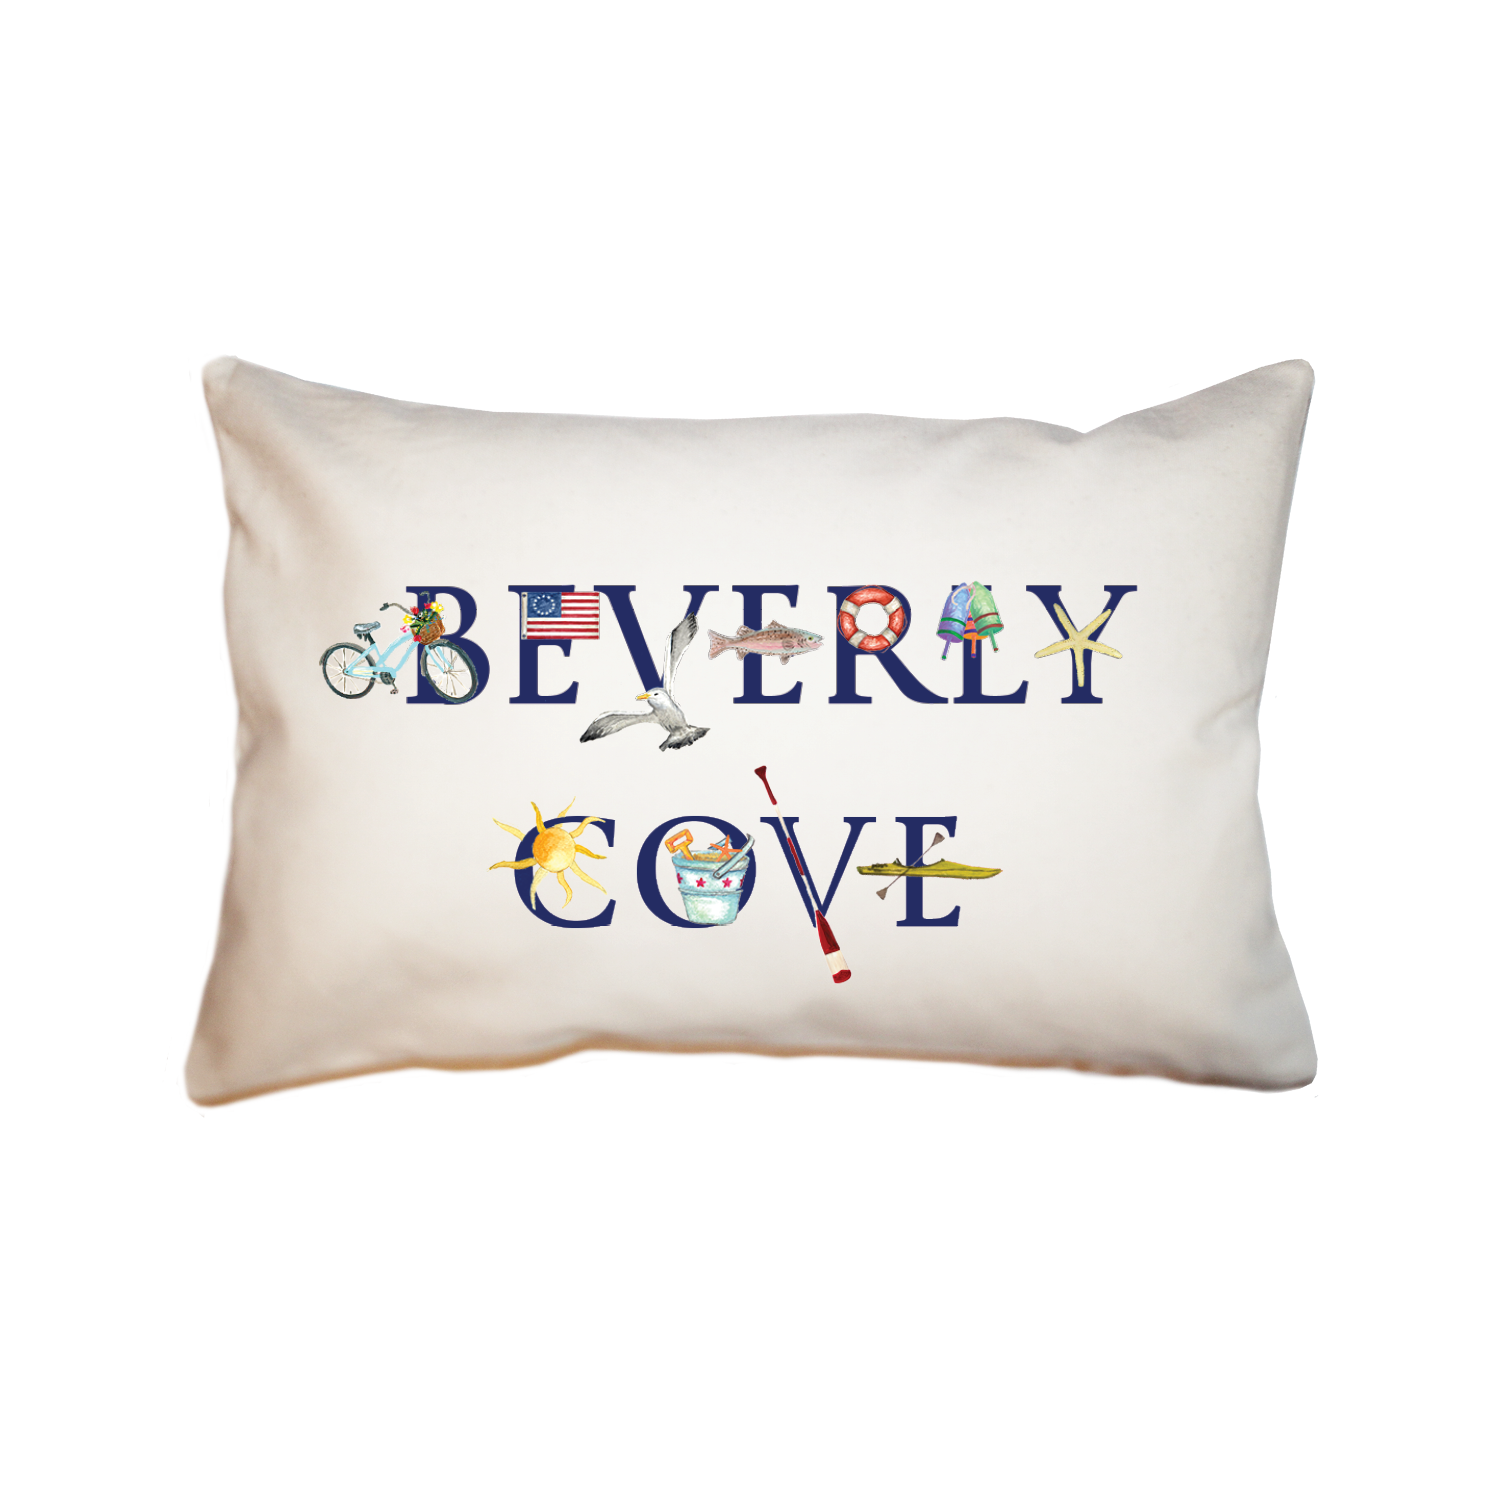 beverly cove large rectangle pillow